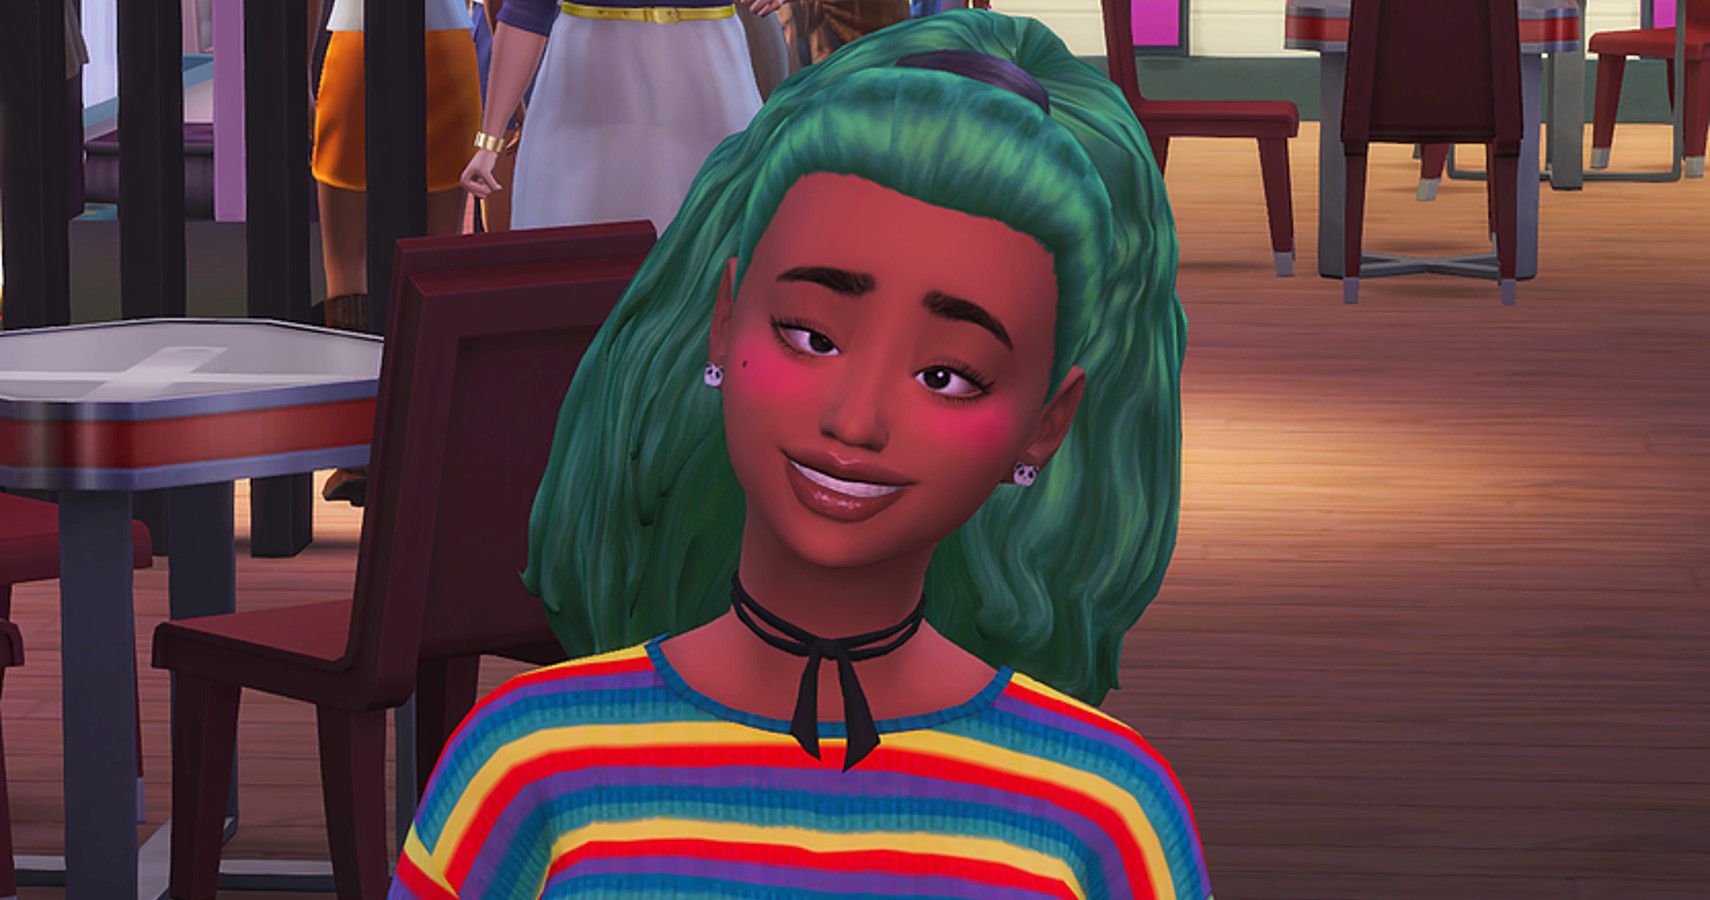 Sims 4 mods for realistic looking sims